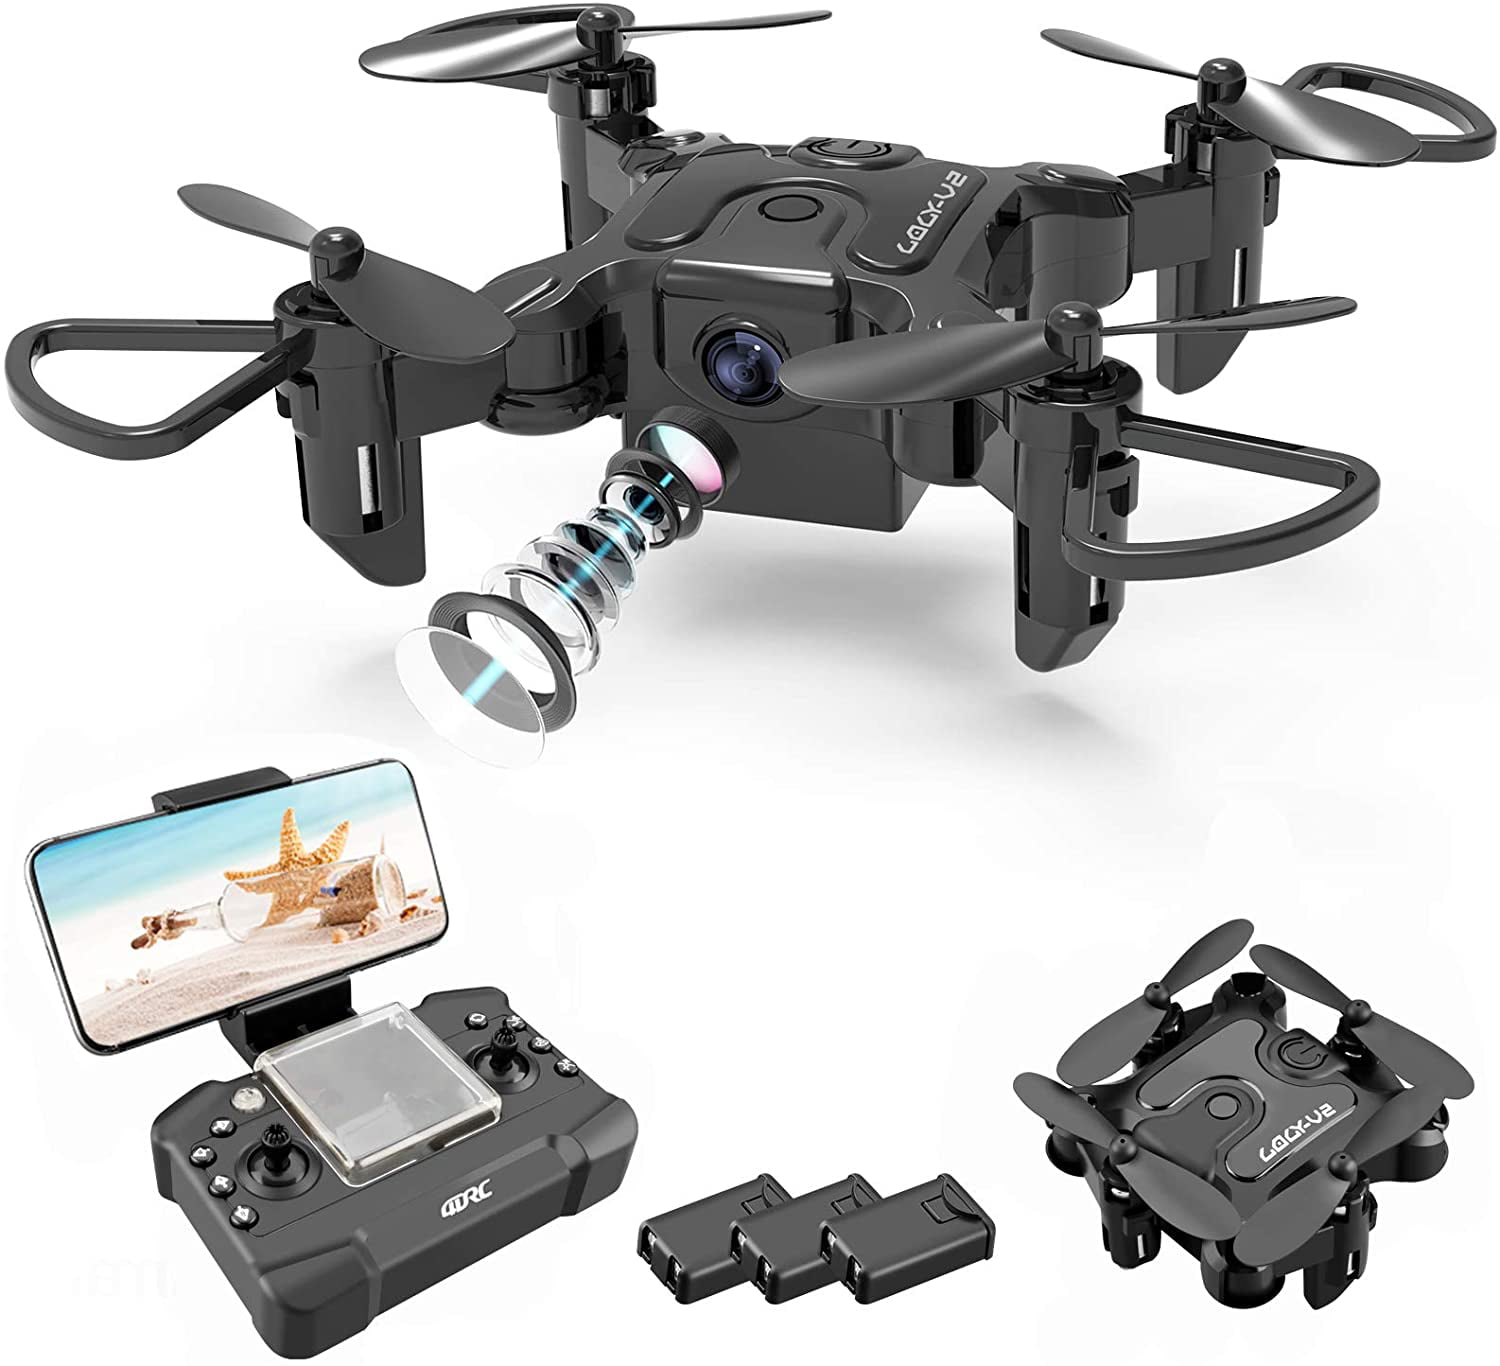 Solid Moxie S163 WiFi FPV Drone with Camera for Adults 1080p HD Live Video with 2 Batteries RC Quadcopter for Kids with Longer Flight Time Altitude Hold Follow Me Foldable Drone for Beginners 